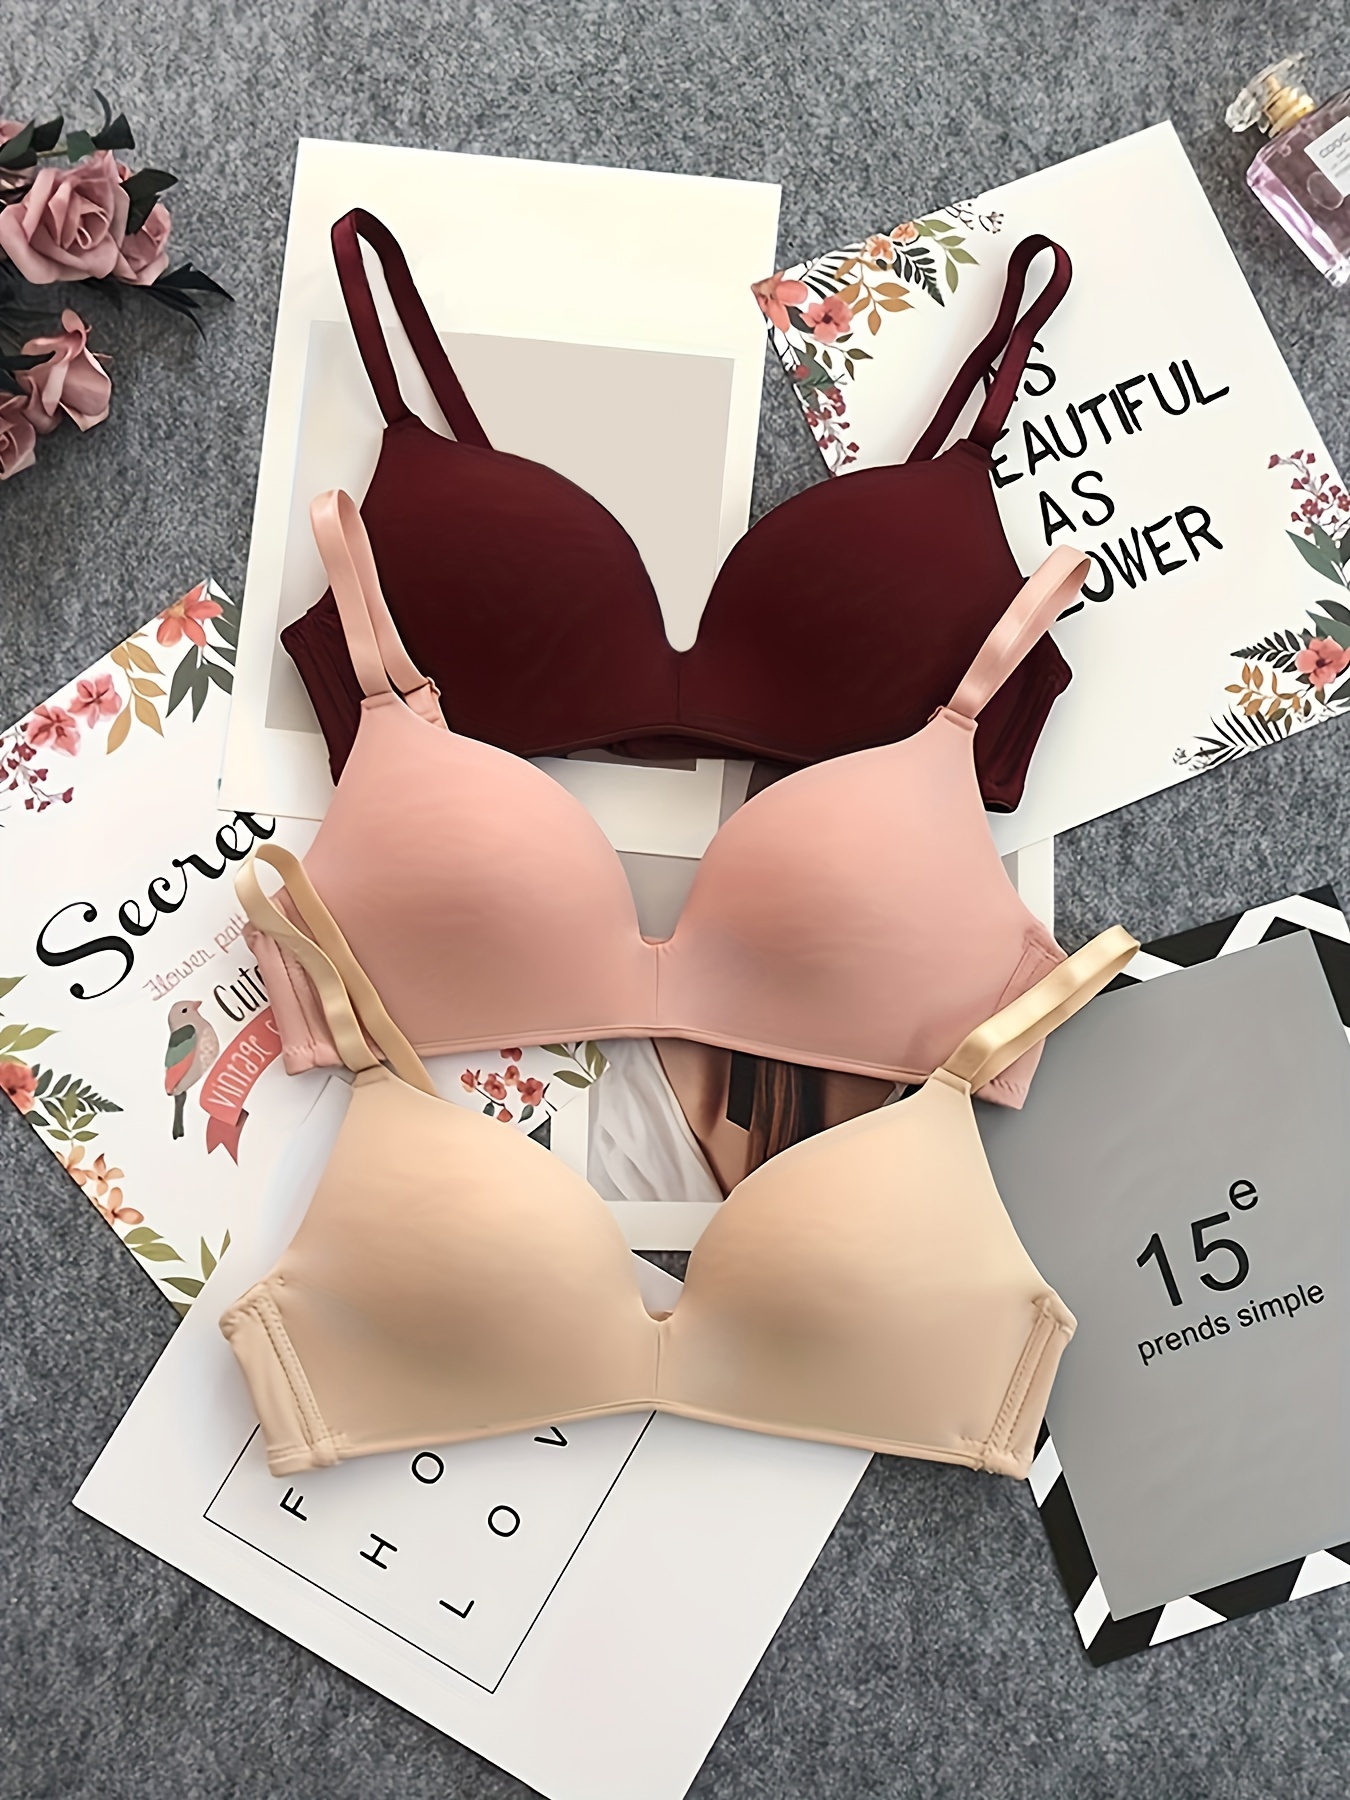 Buy No Steel Ring Girl Bra Set Girl Student Underwear Briefs Brassiere 3/4  Cup Teen Girls Bras and Panty Set at affordable prices — free shipping,  real reviews with photos — Joom